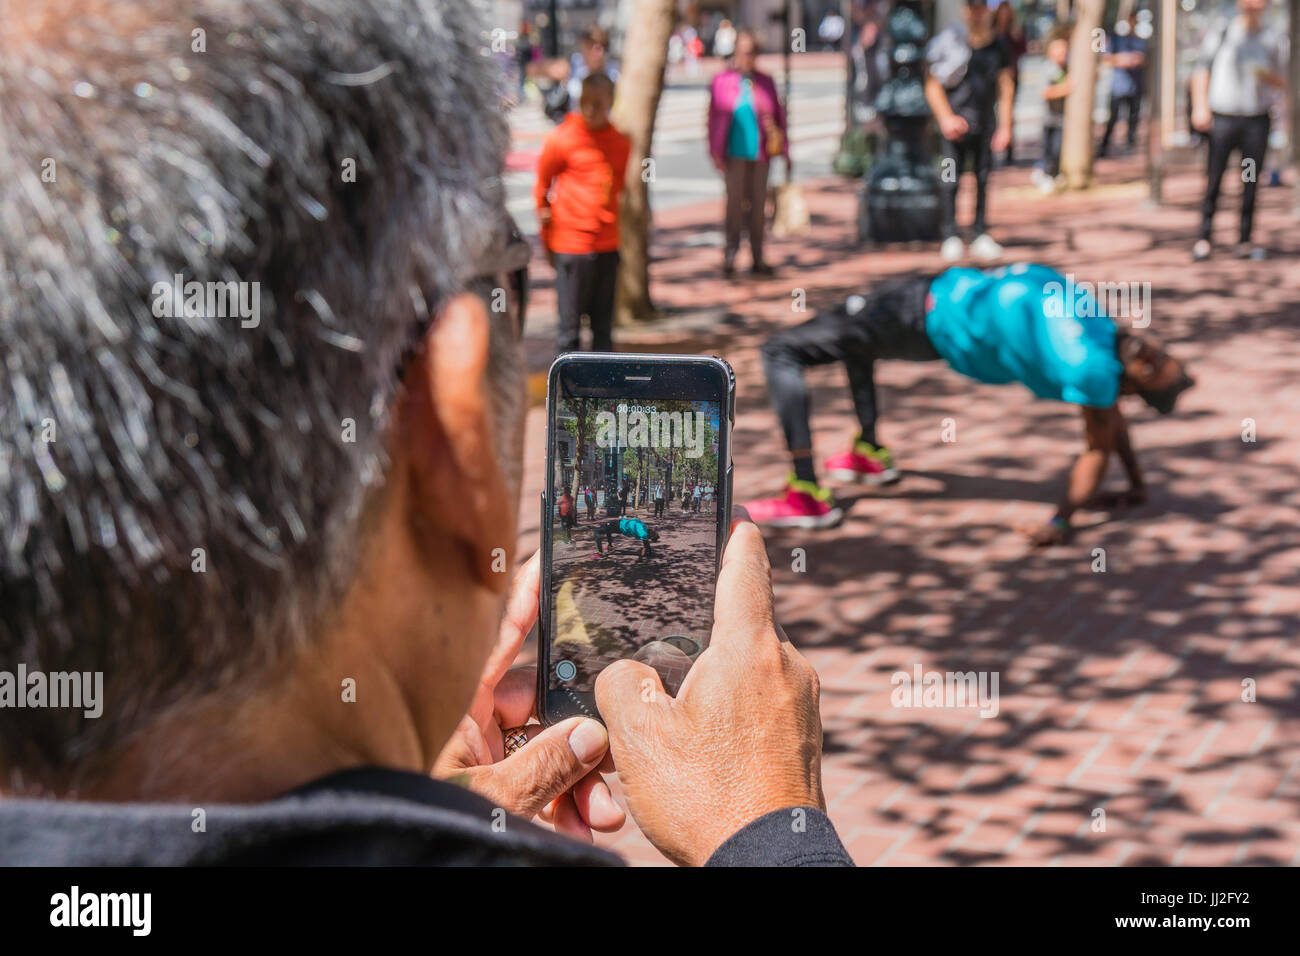 A man uses his cell phone to photograph a street performer on Market Street in San Francisco. The man is facing away and the image of the performer is Stock Photo